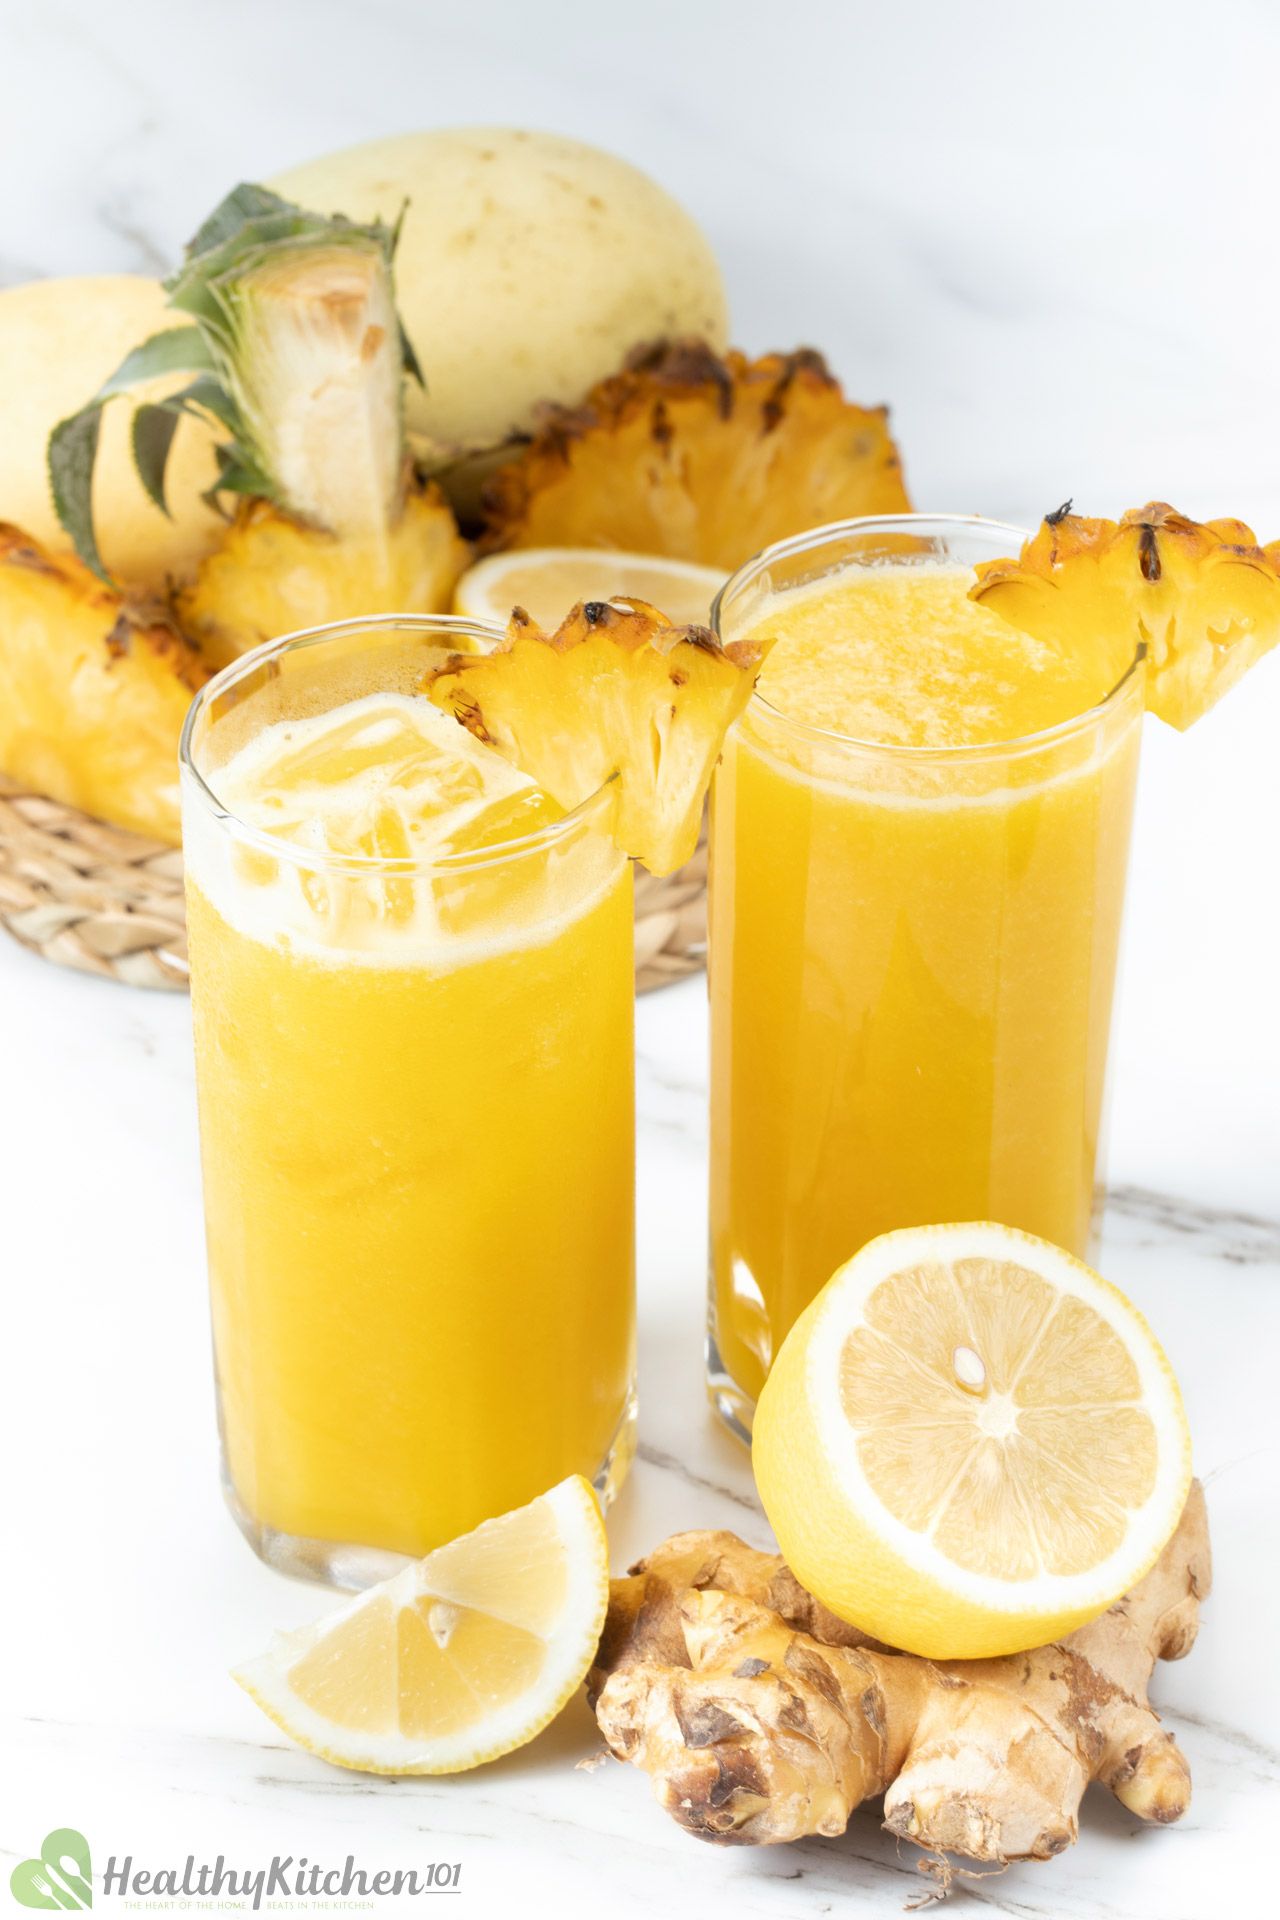 Top 18 Mango Juice Recipes That Work for Weight Loss And Beauty